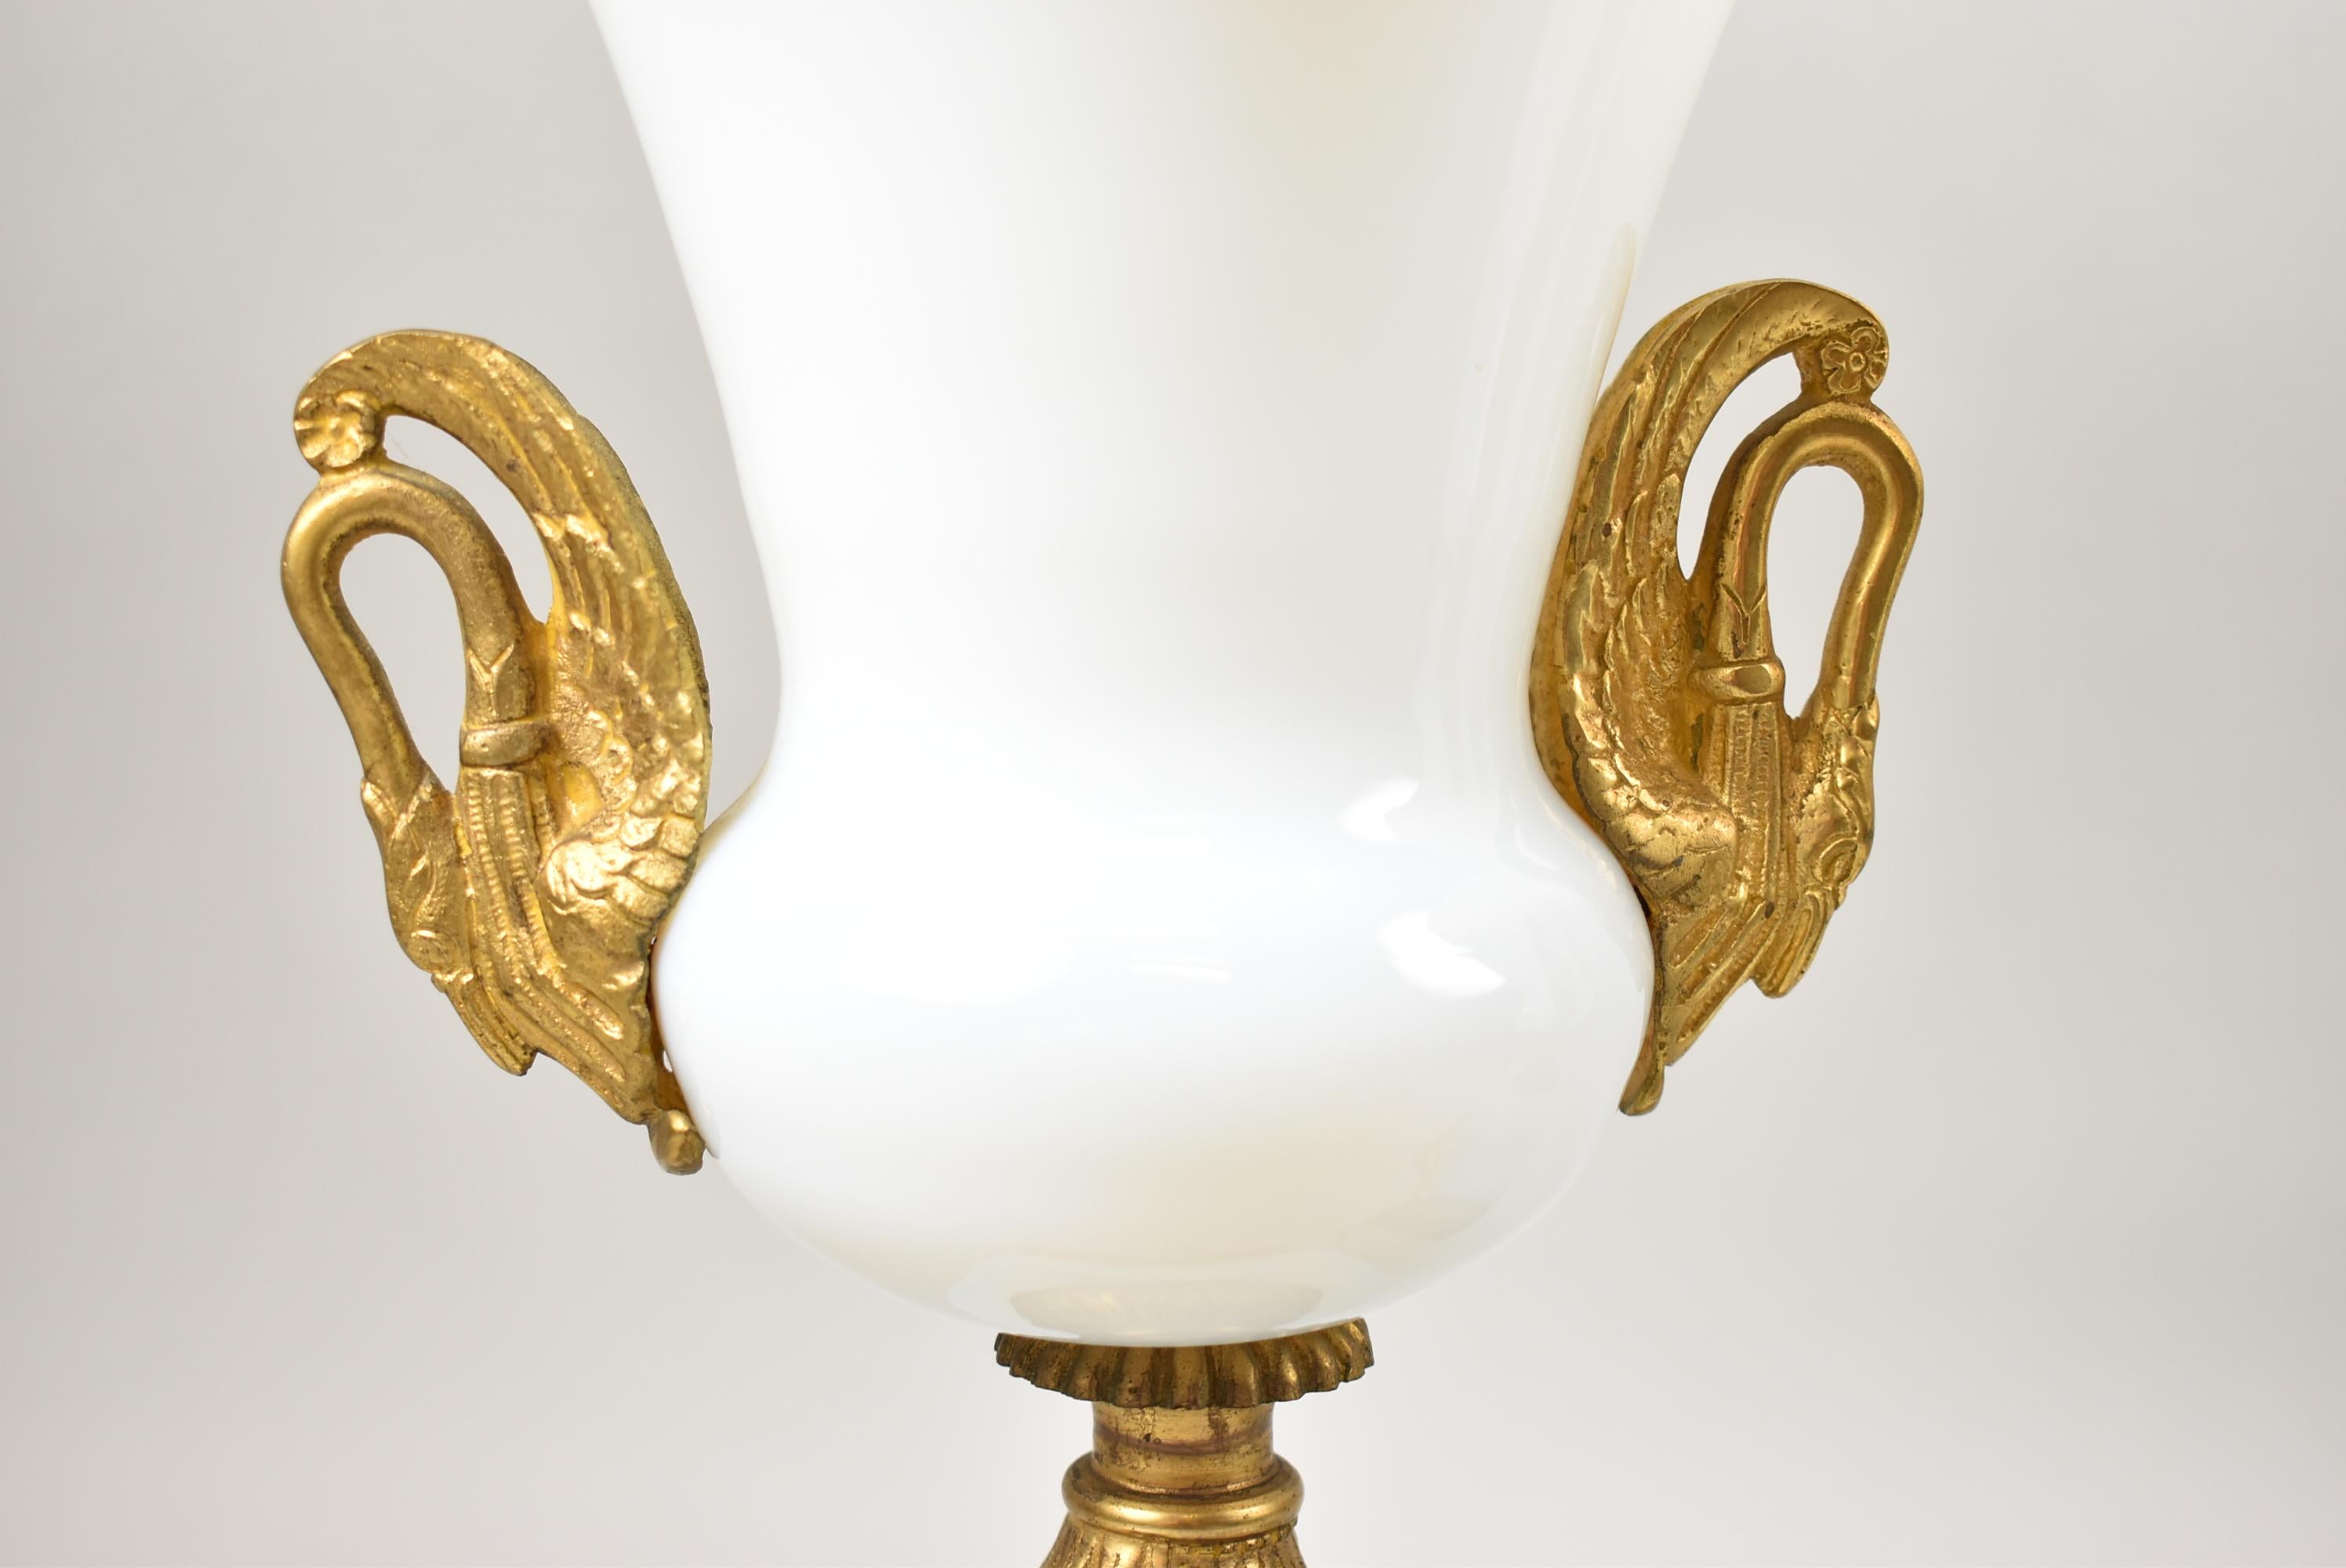 Pair of French white opaline glass Campana shape vases with bronze swan mounted handles.